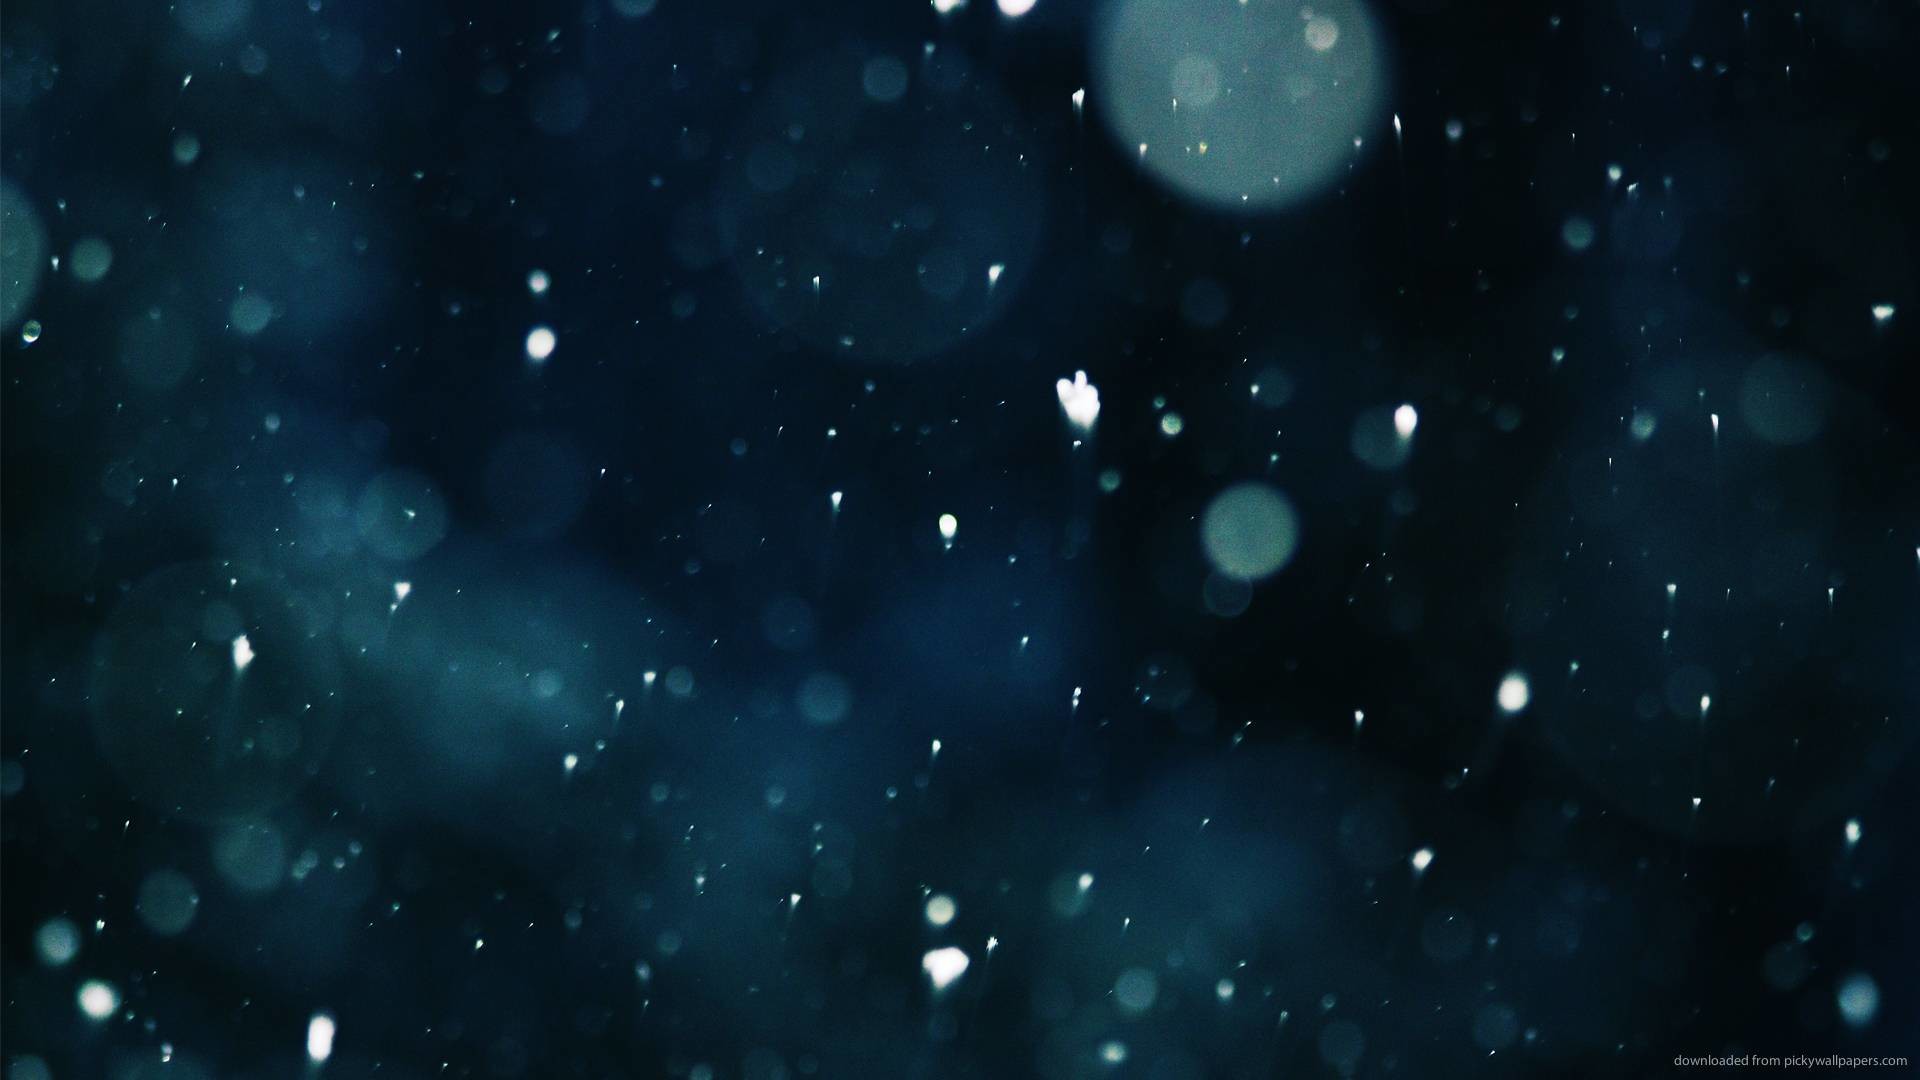 Dark Blue Wallpaper 19201080 Download 19201080 Snowflakes In A .